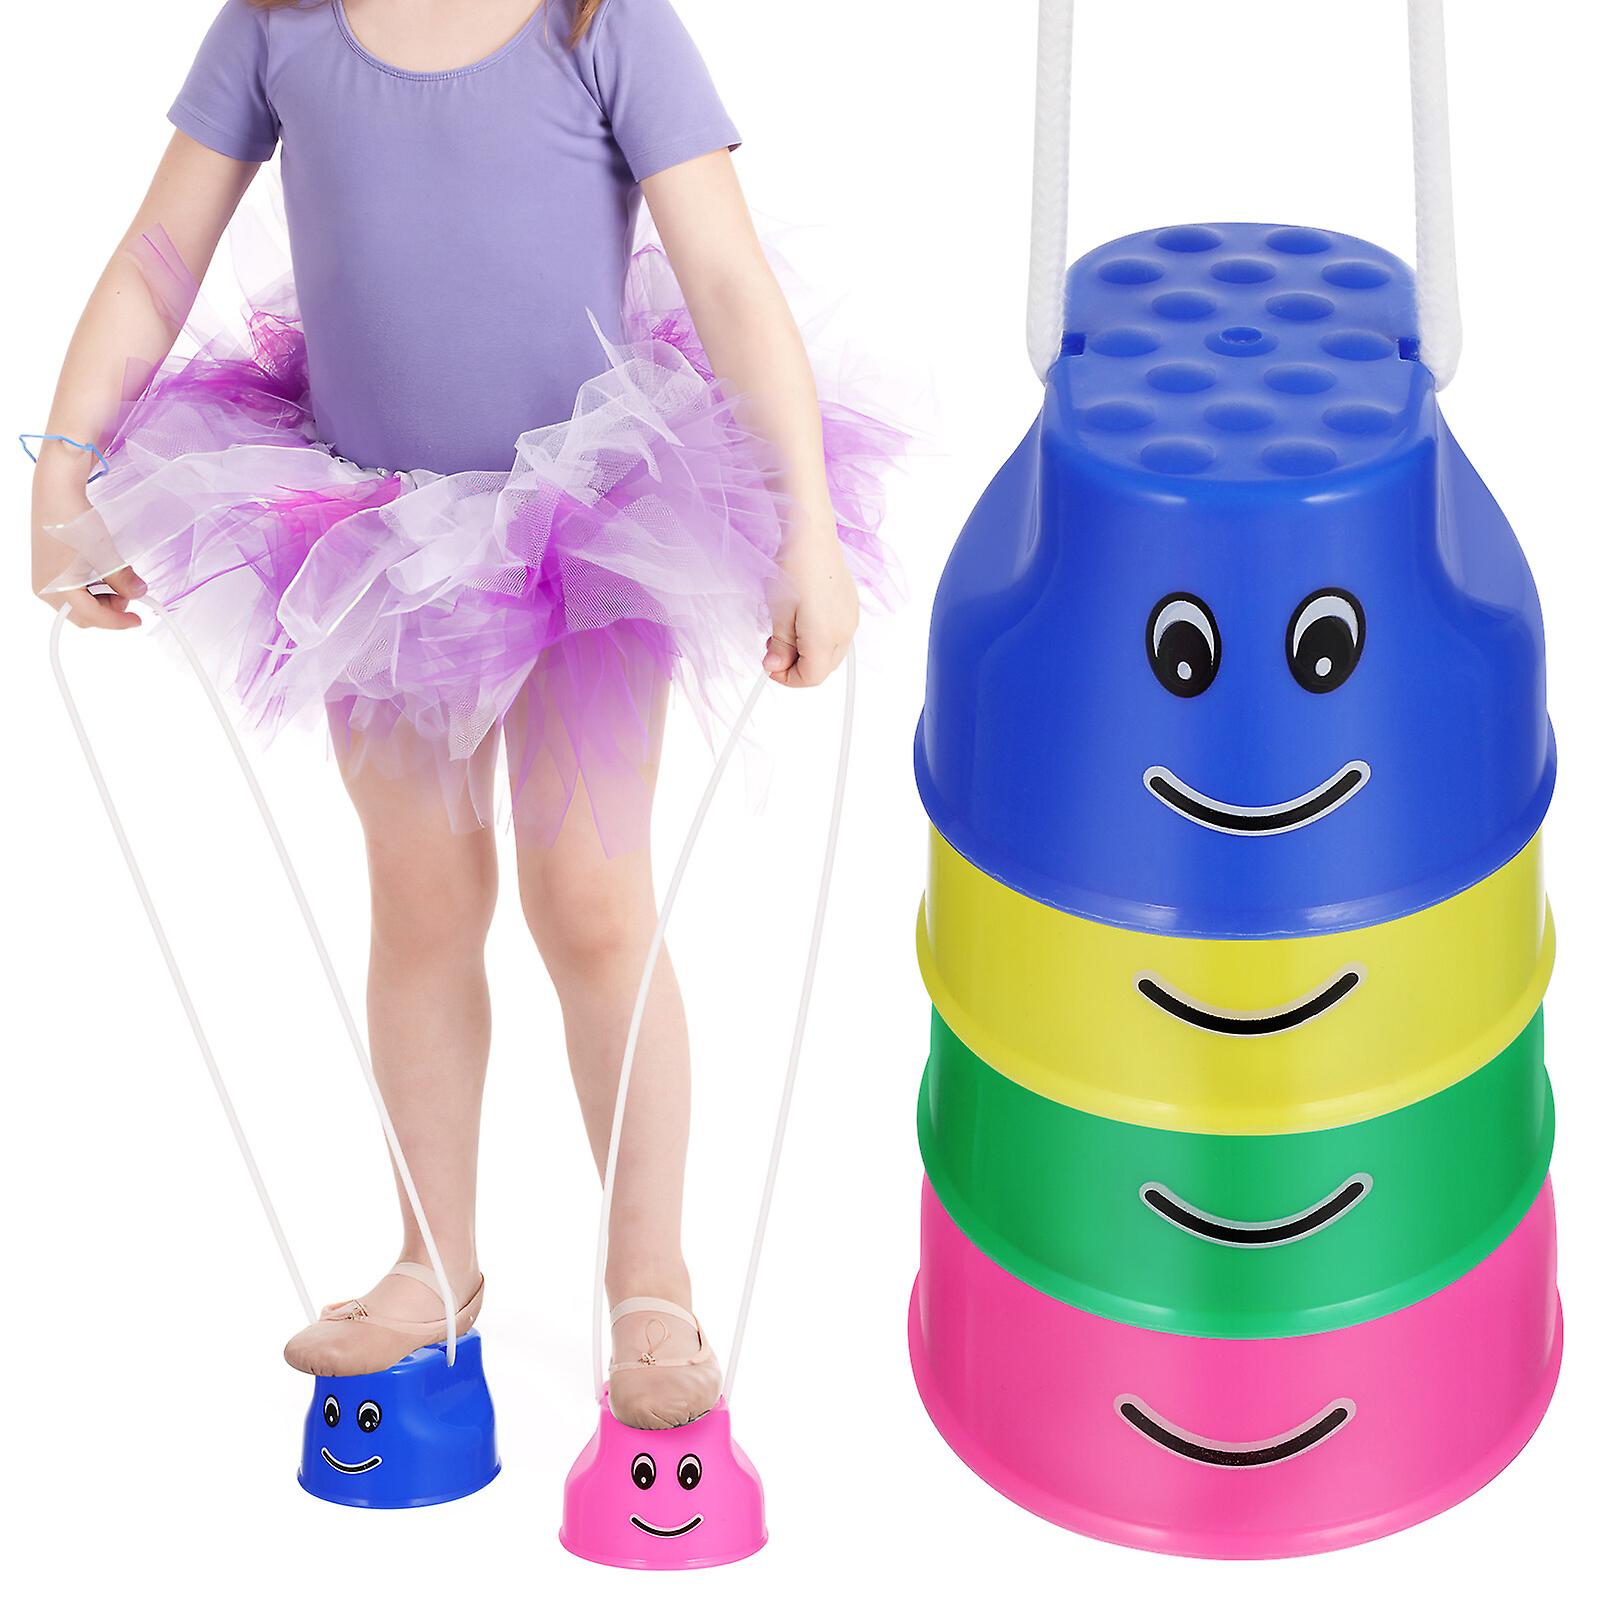 4pcs Sports Stilts Toys Sensory Training Stilts Equipment Children Kids Outdoor Games Early Education Balance Ability Developing Toys(mixed Color)